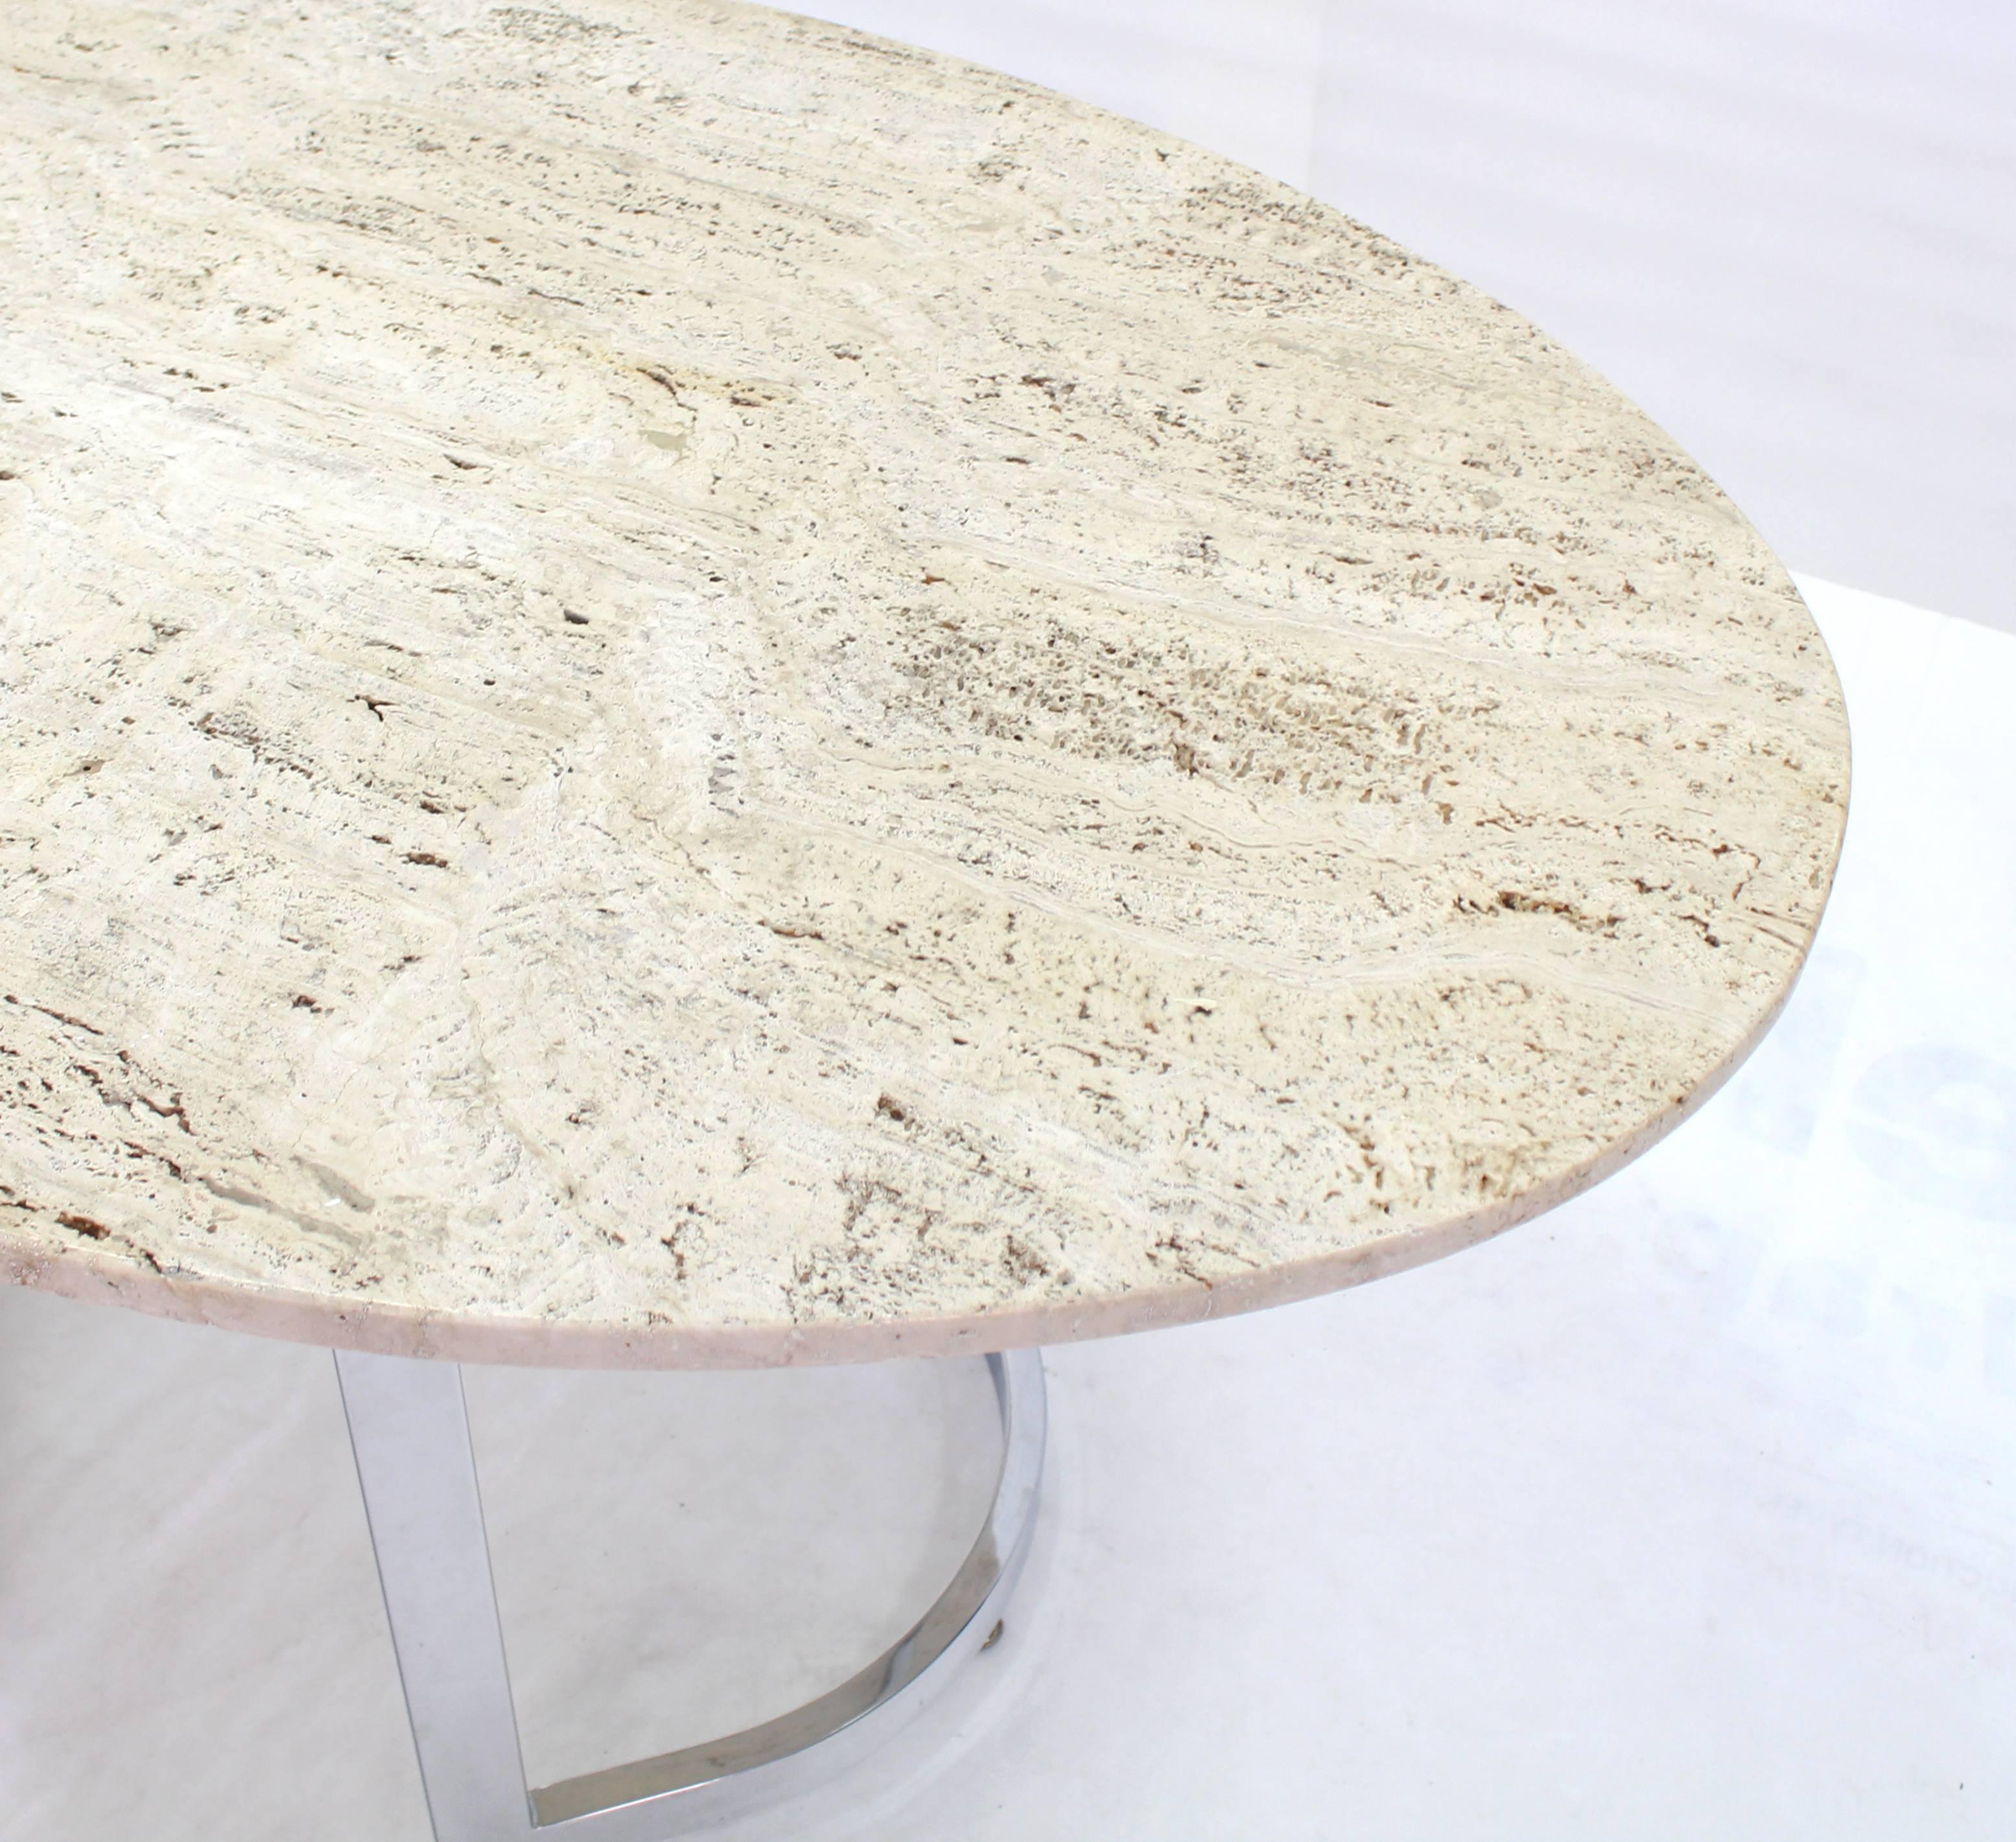 Polished Oval Travertine Top Dining Table on Chrome Base